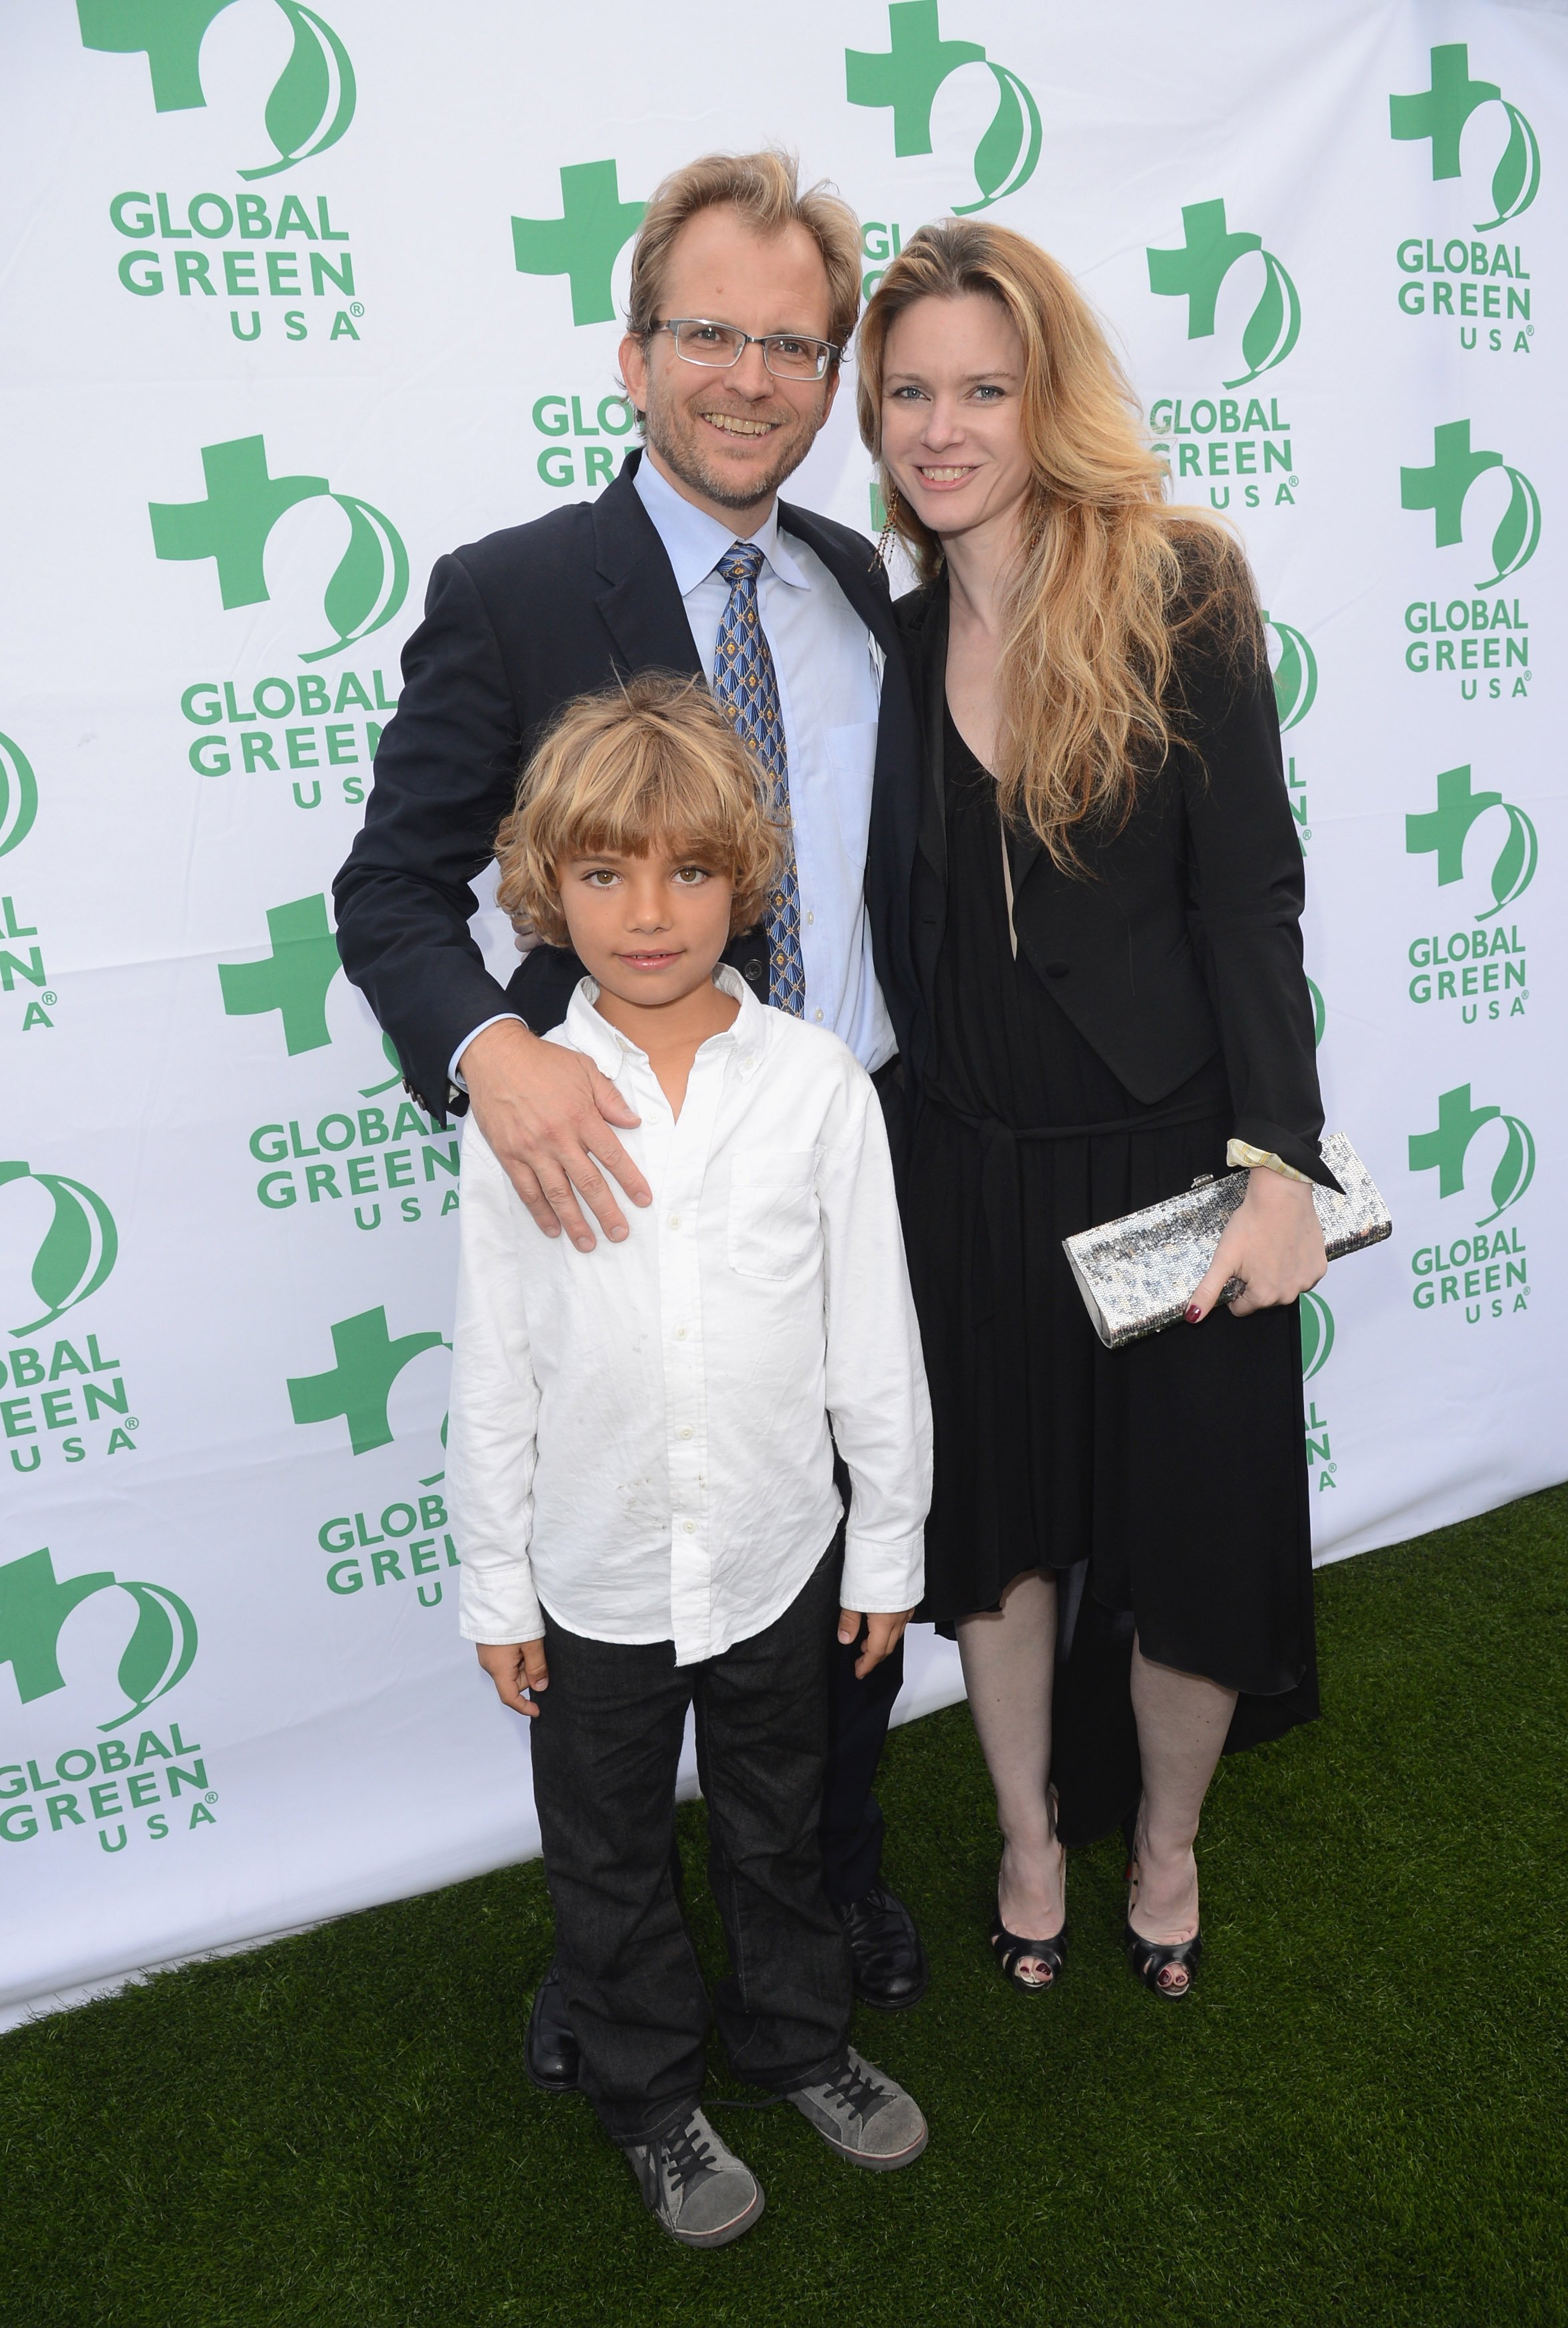 Matt Petersen and Justine Musk pose with a young boy at the 16th Annual Global Green USA Millennium Awards held at Fairmont Miramar Hotel on June 2, 2012, in Santa Monica, California | Source: Getty Images